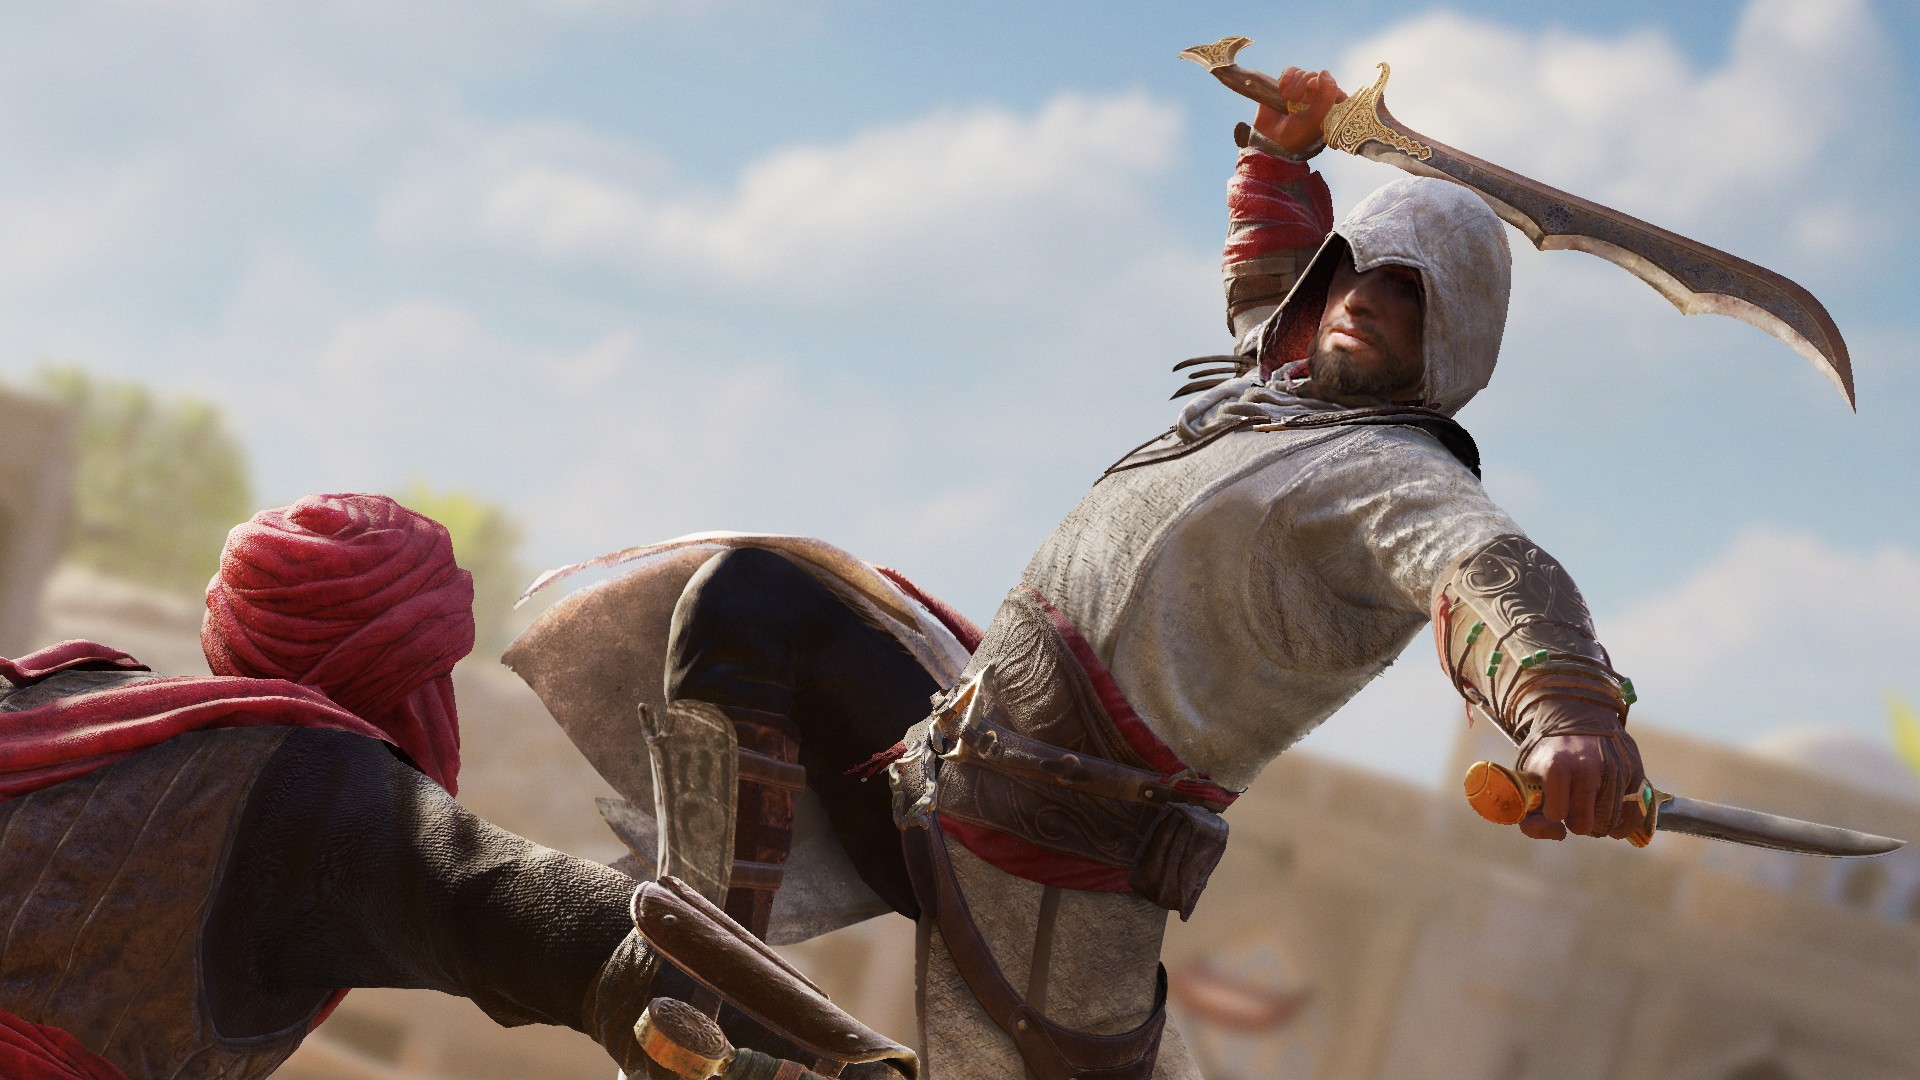 Assassin's Creed Mirage Release Date Potentially Revealed